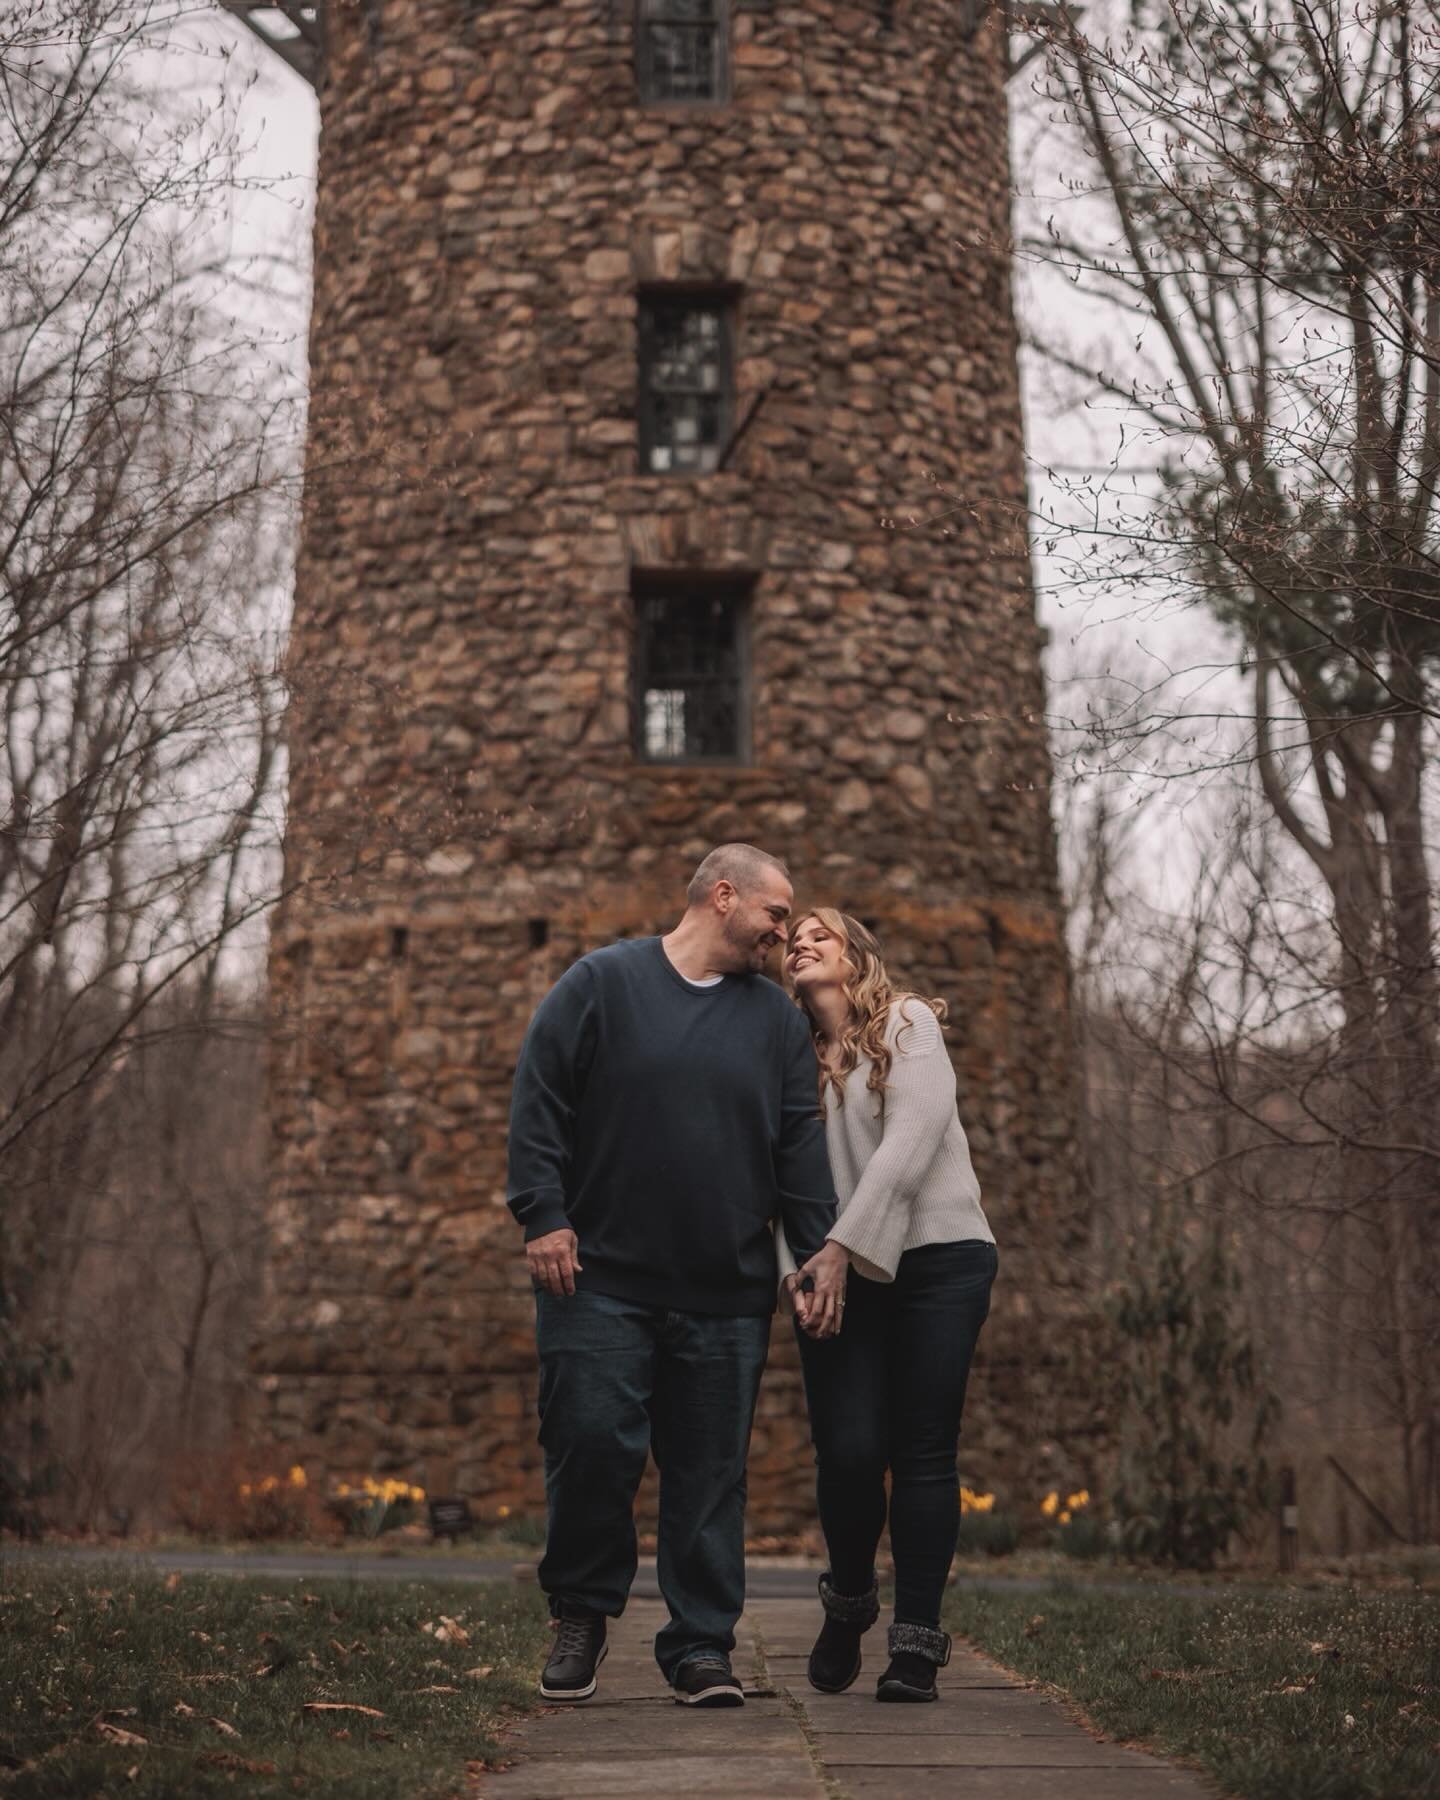 It was wonderful getting to do an engagement shoot with John &amp; Lissette before we photograph their wedding! If you didn&rsquo;t know, most of our wedding packages come with an engagement shoot included which is 1. A great deal and 2. A great way 